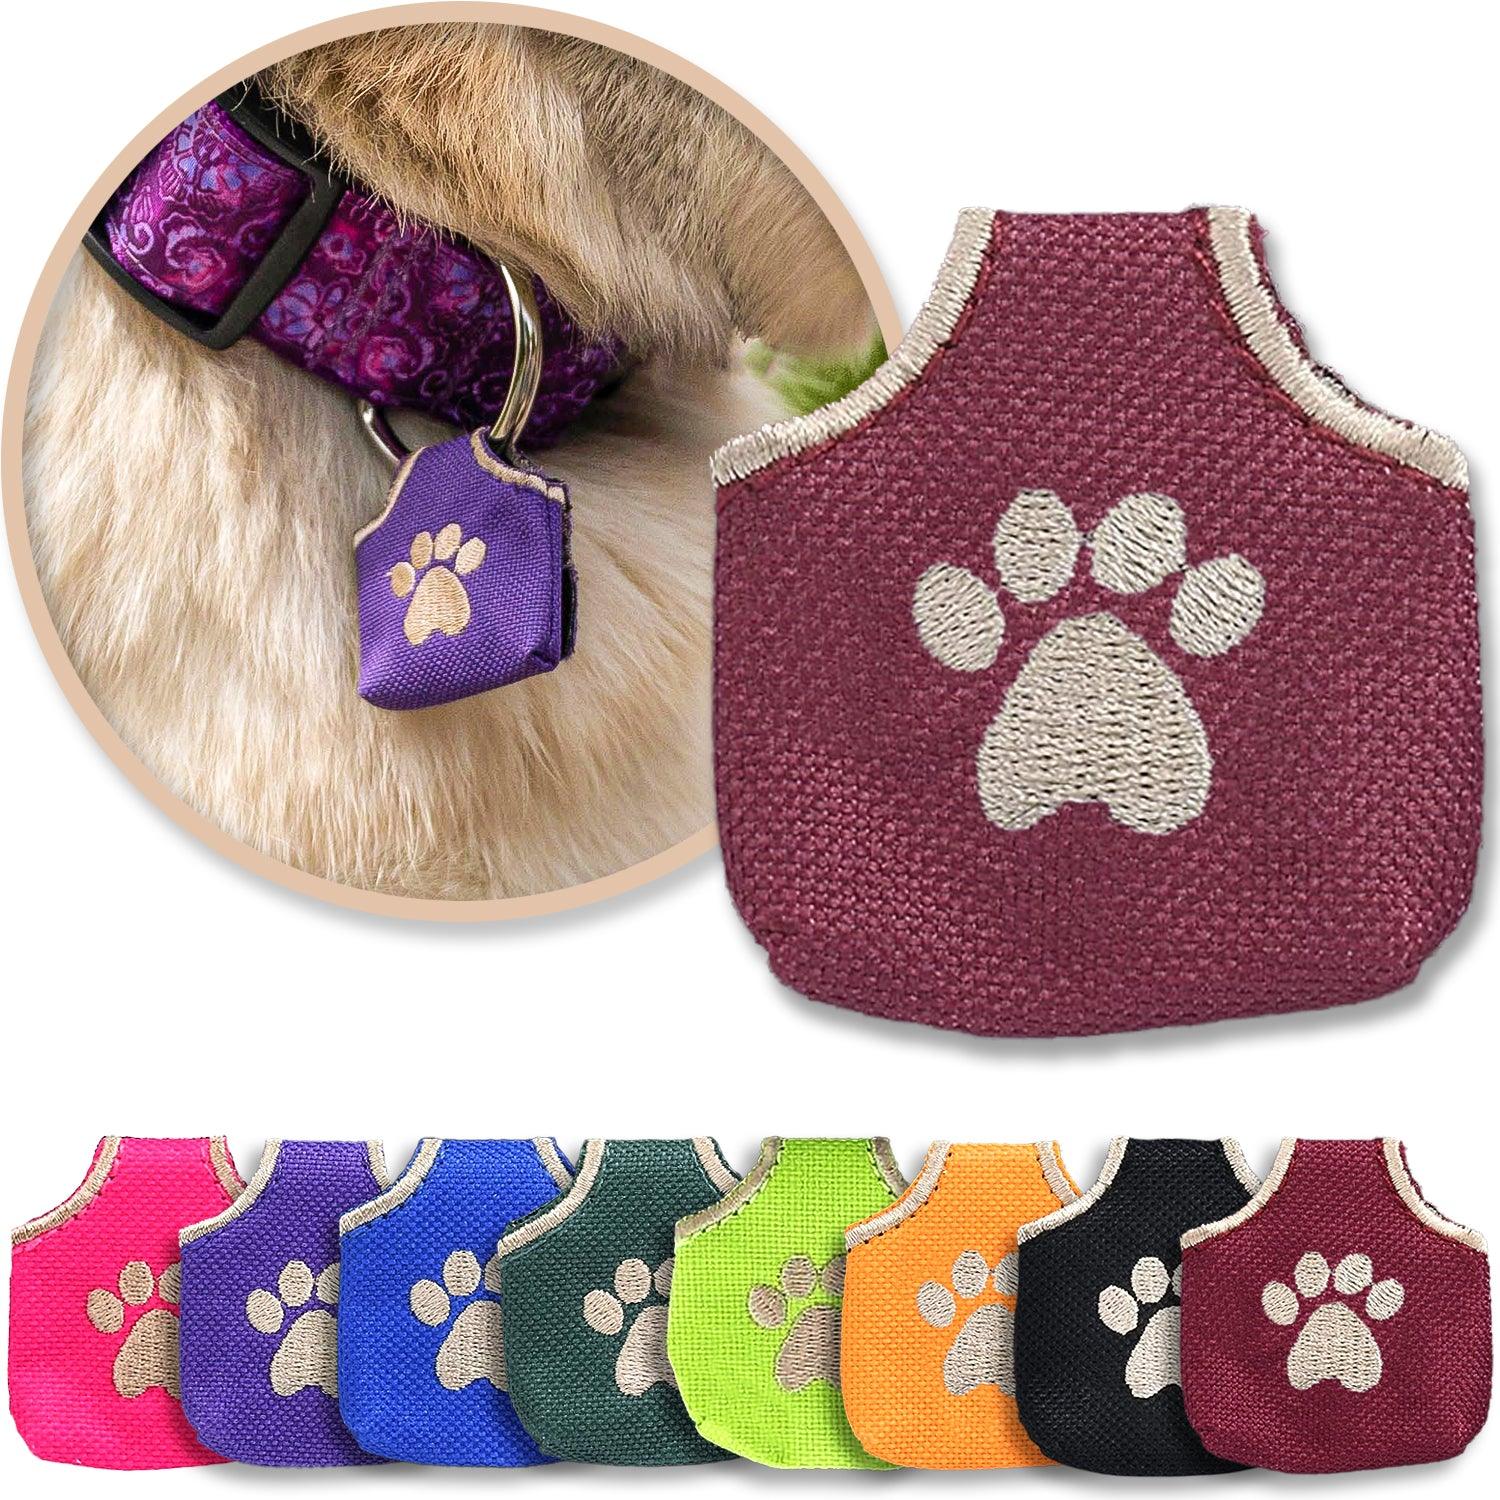 Red dog tag cover shown with other colors